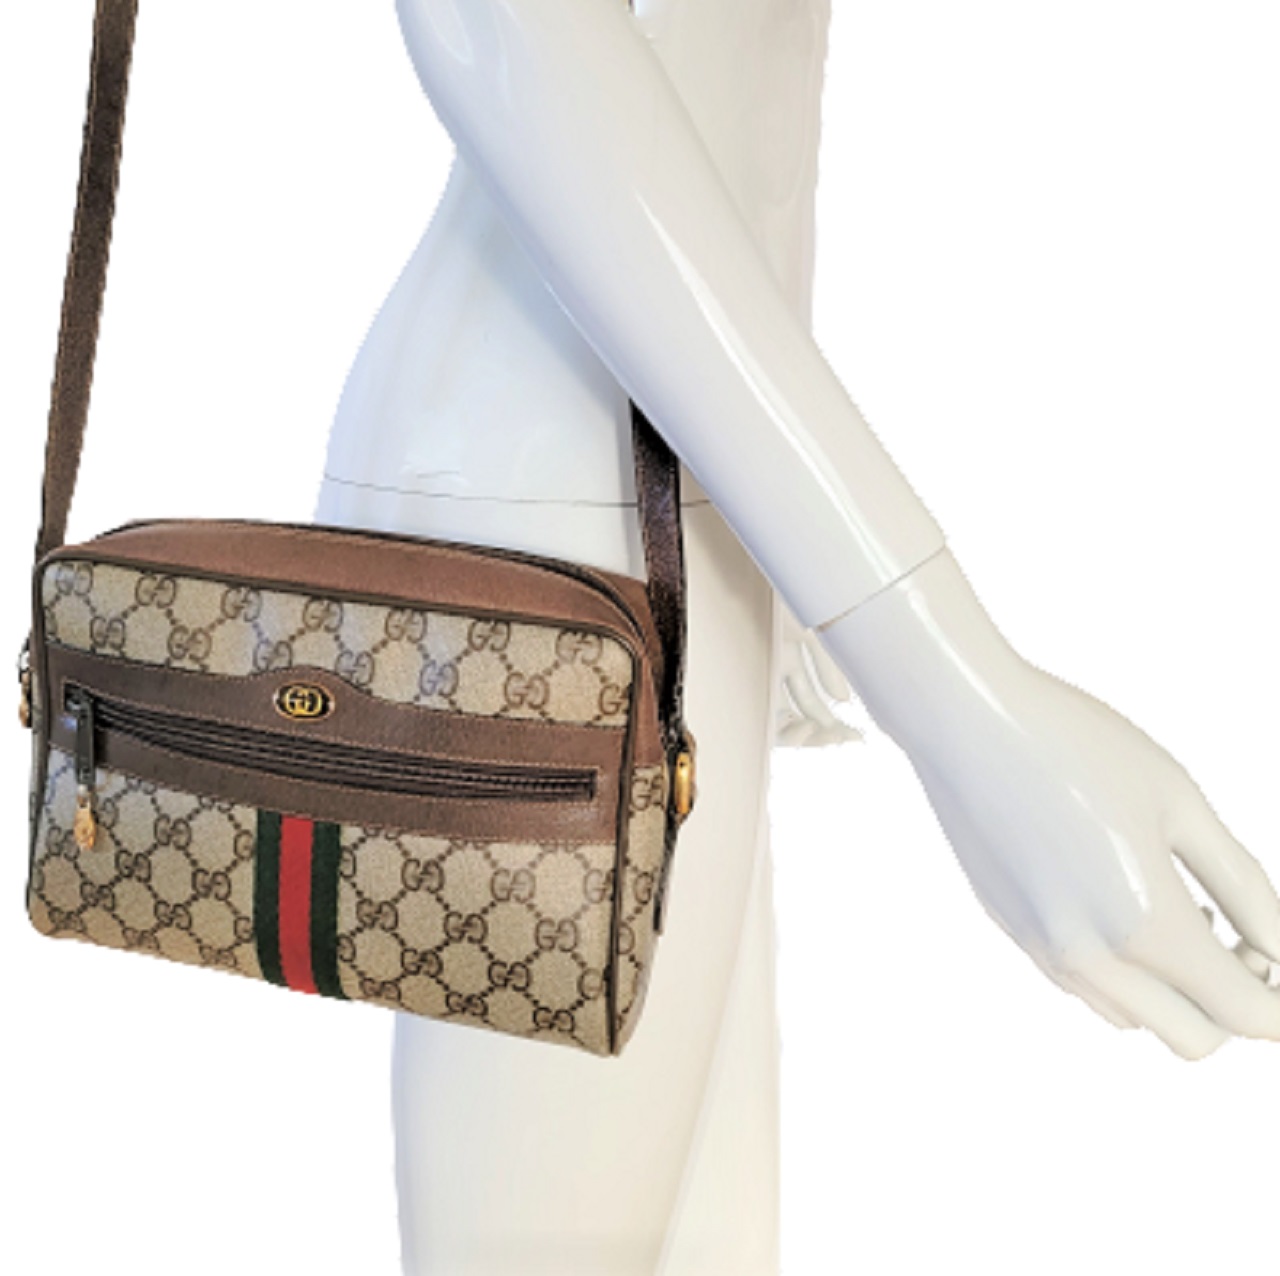 Gucci, Bags, Vintage Gucci Ophidia Crossbody Bag 98s